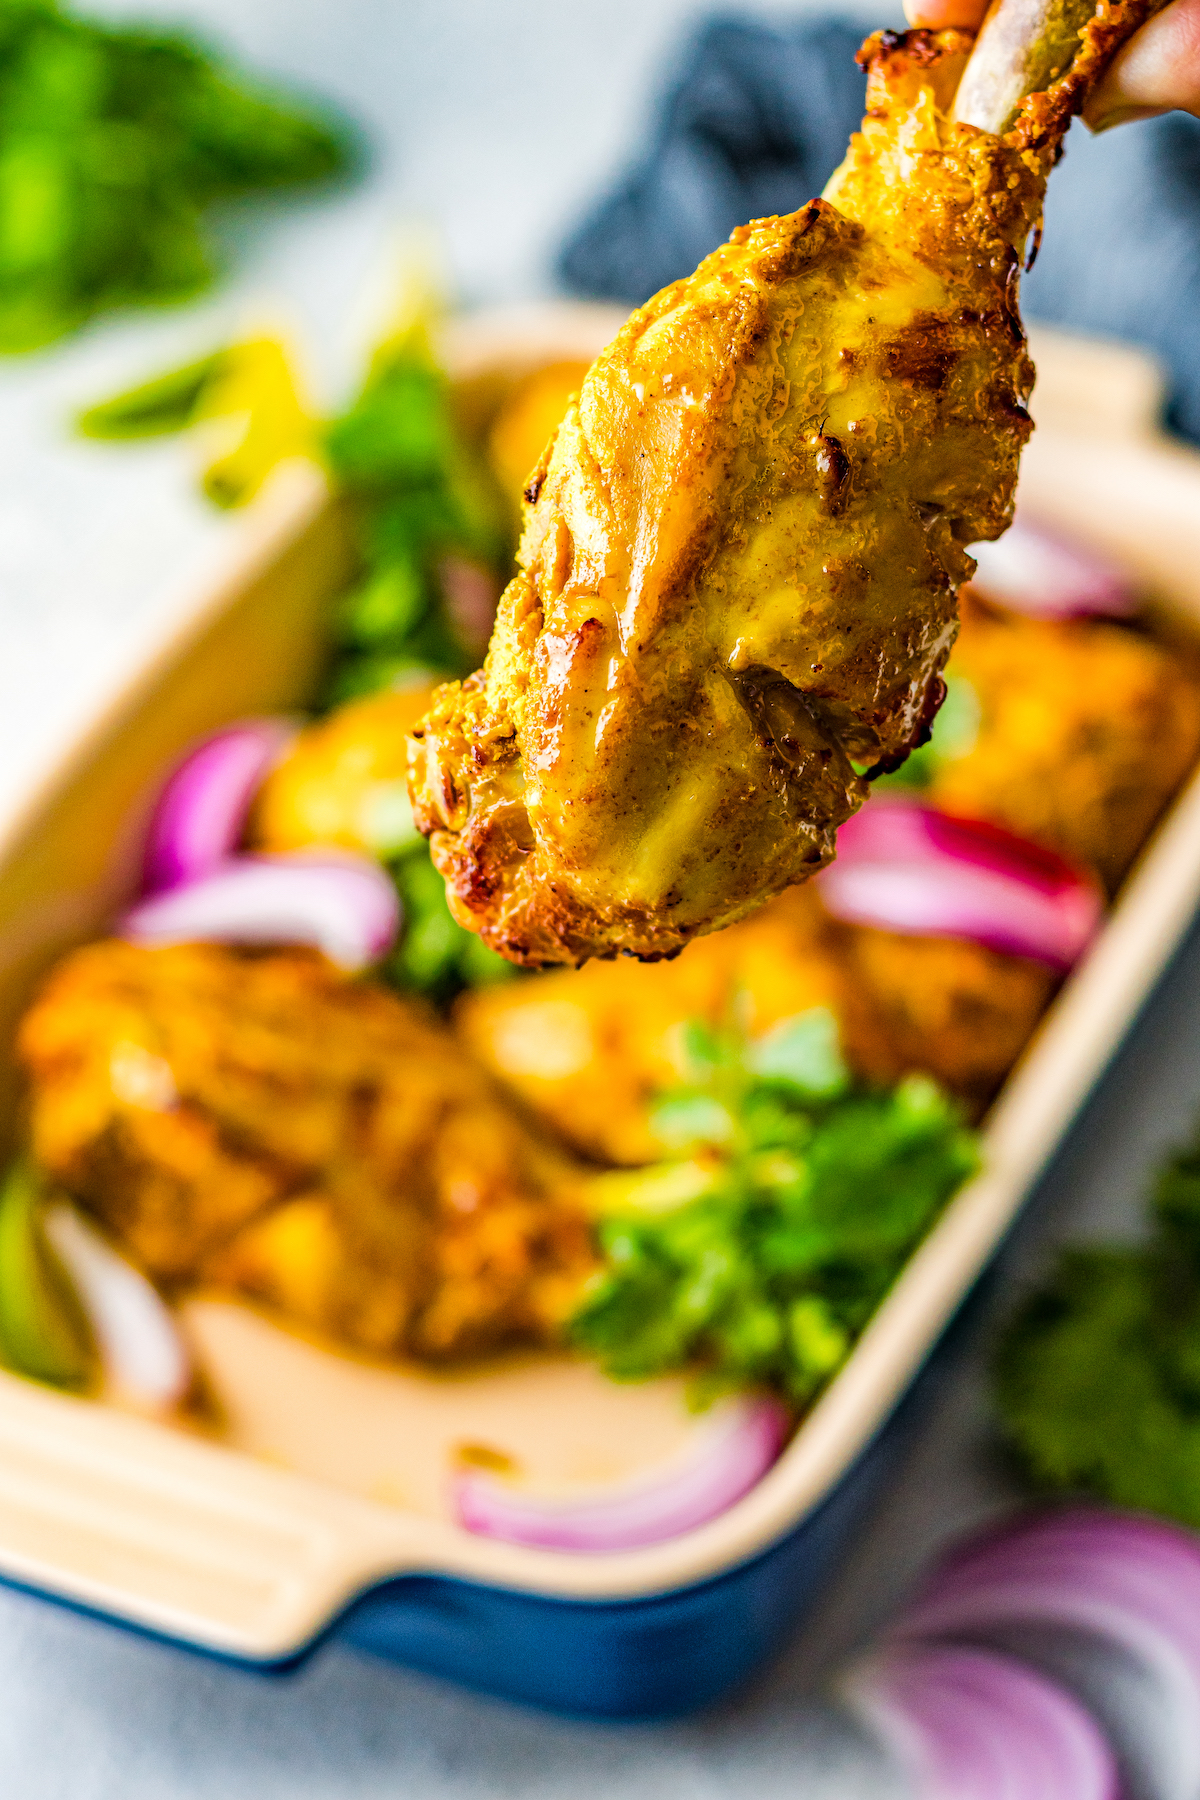 A piece of tandoori chicken is held near the camera to show texture. In the background is a serving dish of more chicken.